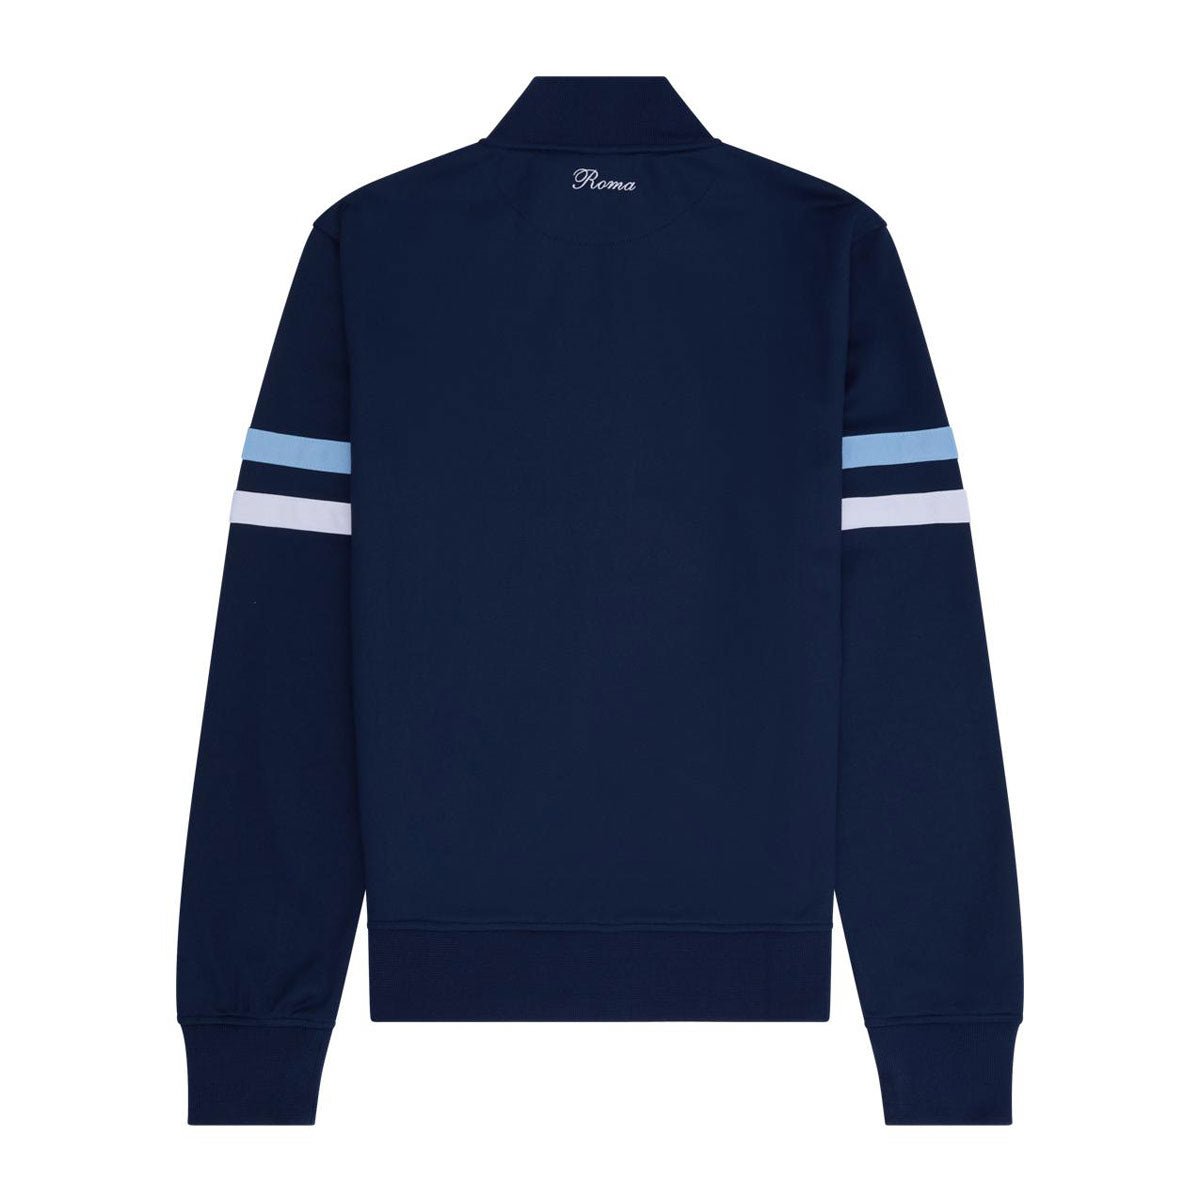 Ellesse Roma Track Top Navy/Light Blue and White